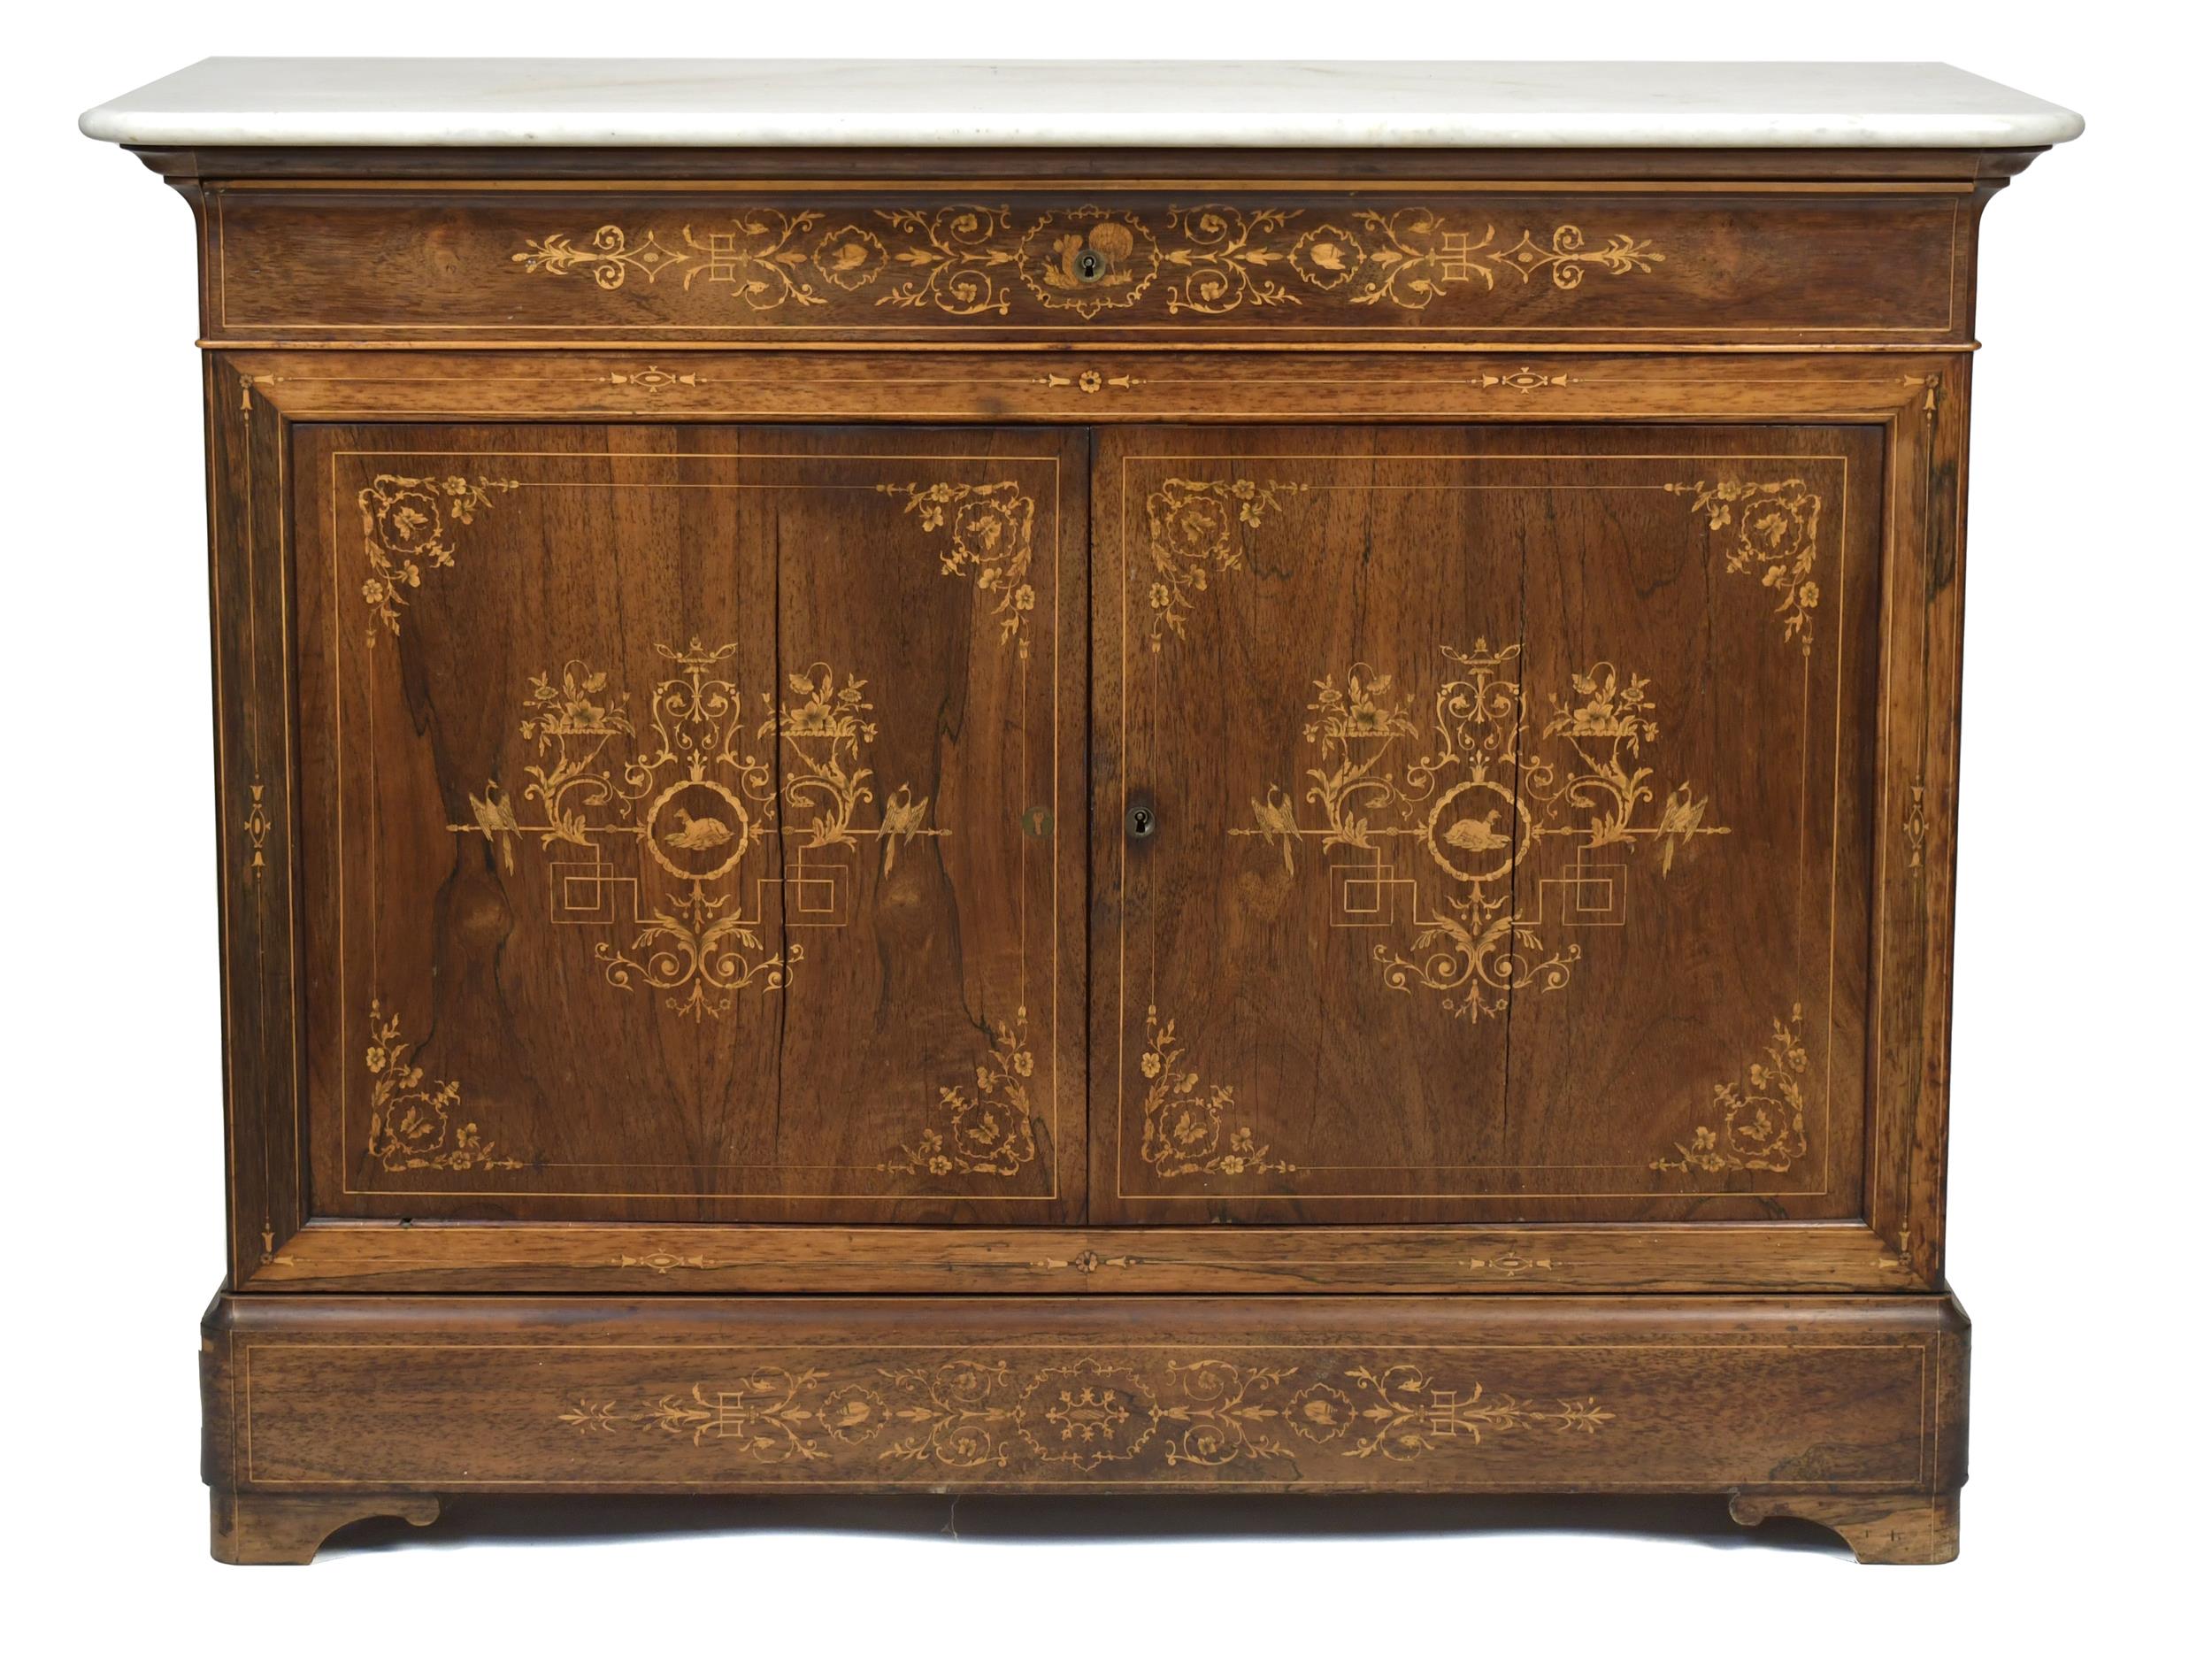 19TH C. LOUIS PHILIPPE INLAID MARBLE